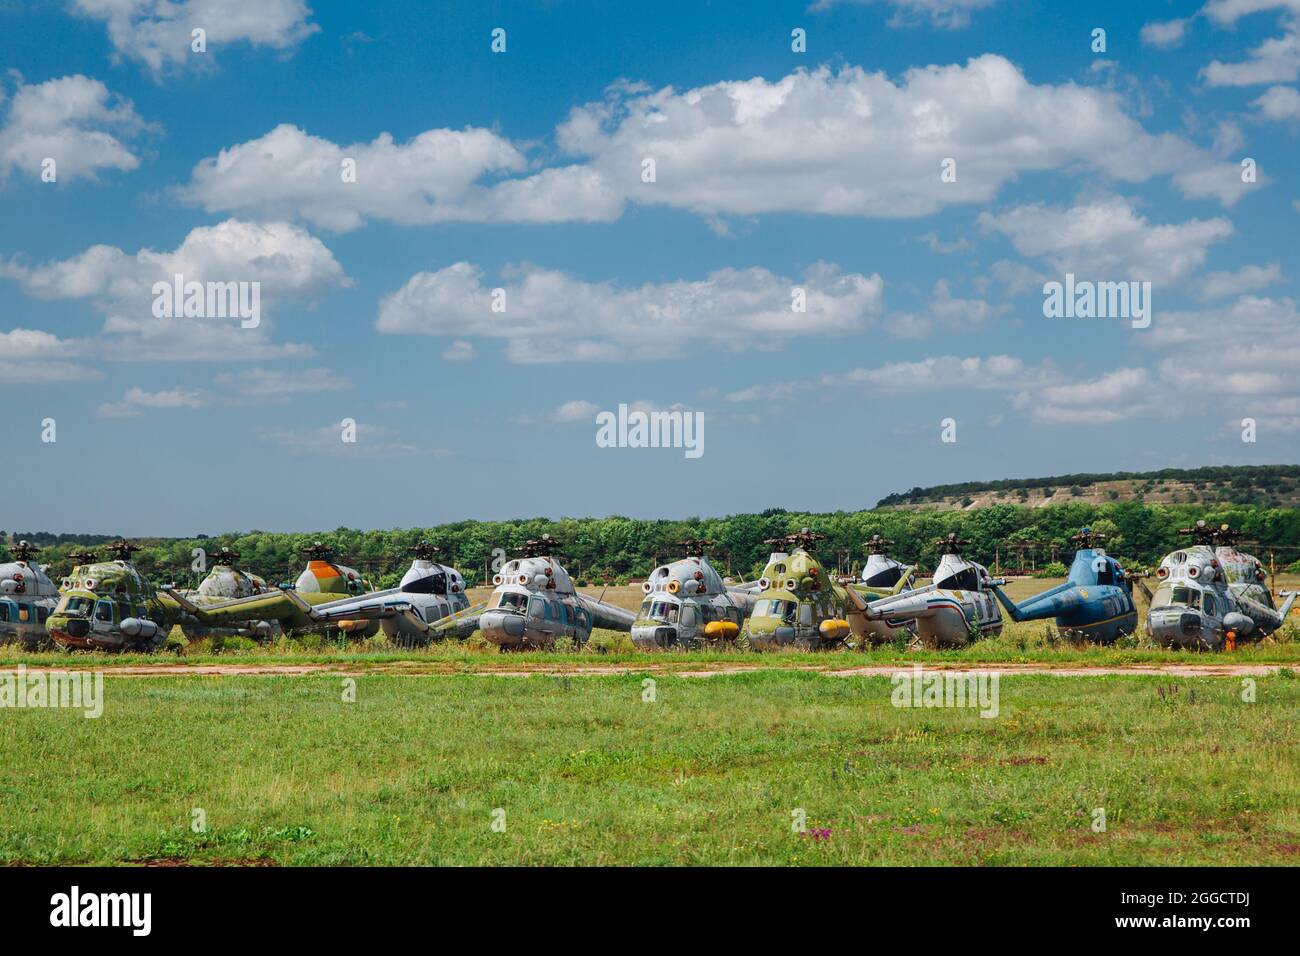 Old abandoned helicopters, broken non-working helicopters, cemetery of old helicopters. Stock Photo